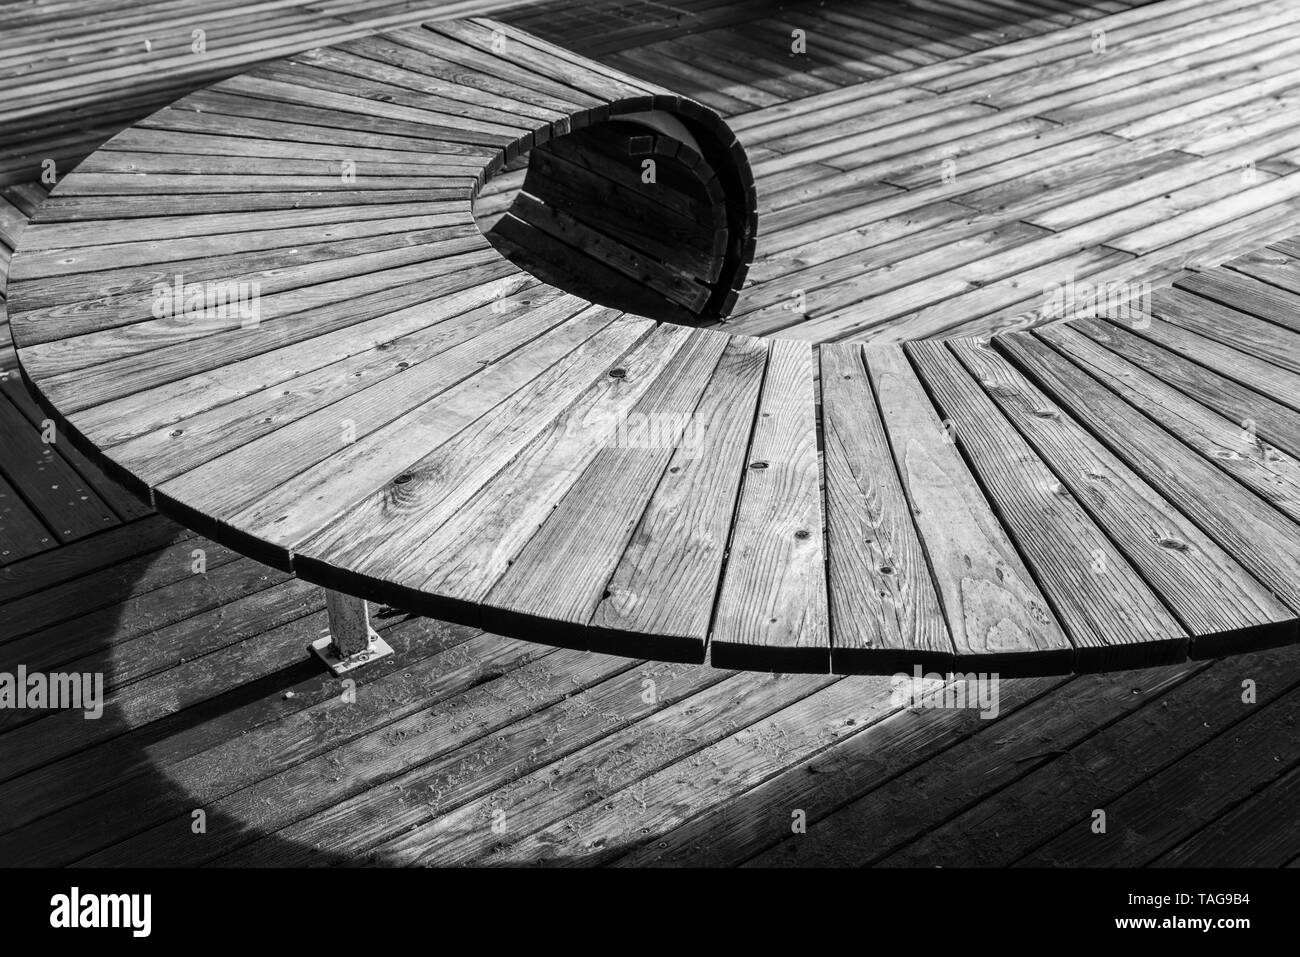 Black white image of modern geometric wooden construction intended as seating, Germany Stock Photo